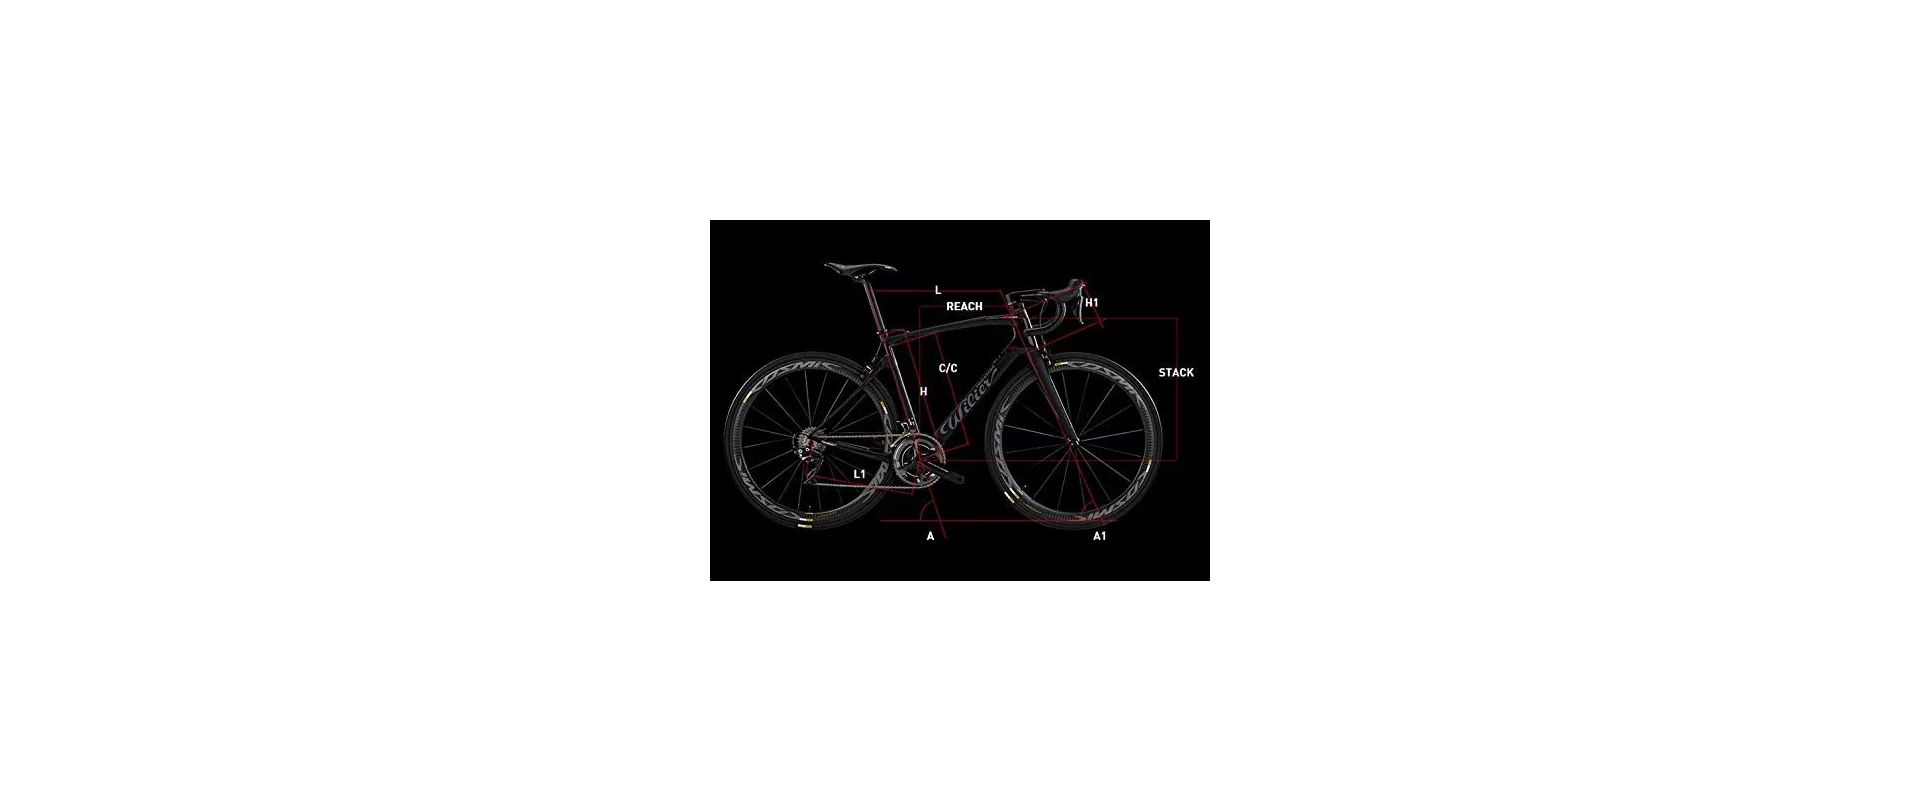 Wilier Cento10NDR Disc / Рама / 2021 фото 7